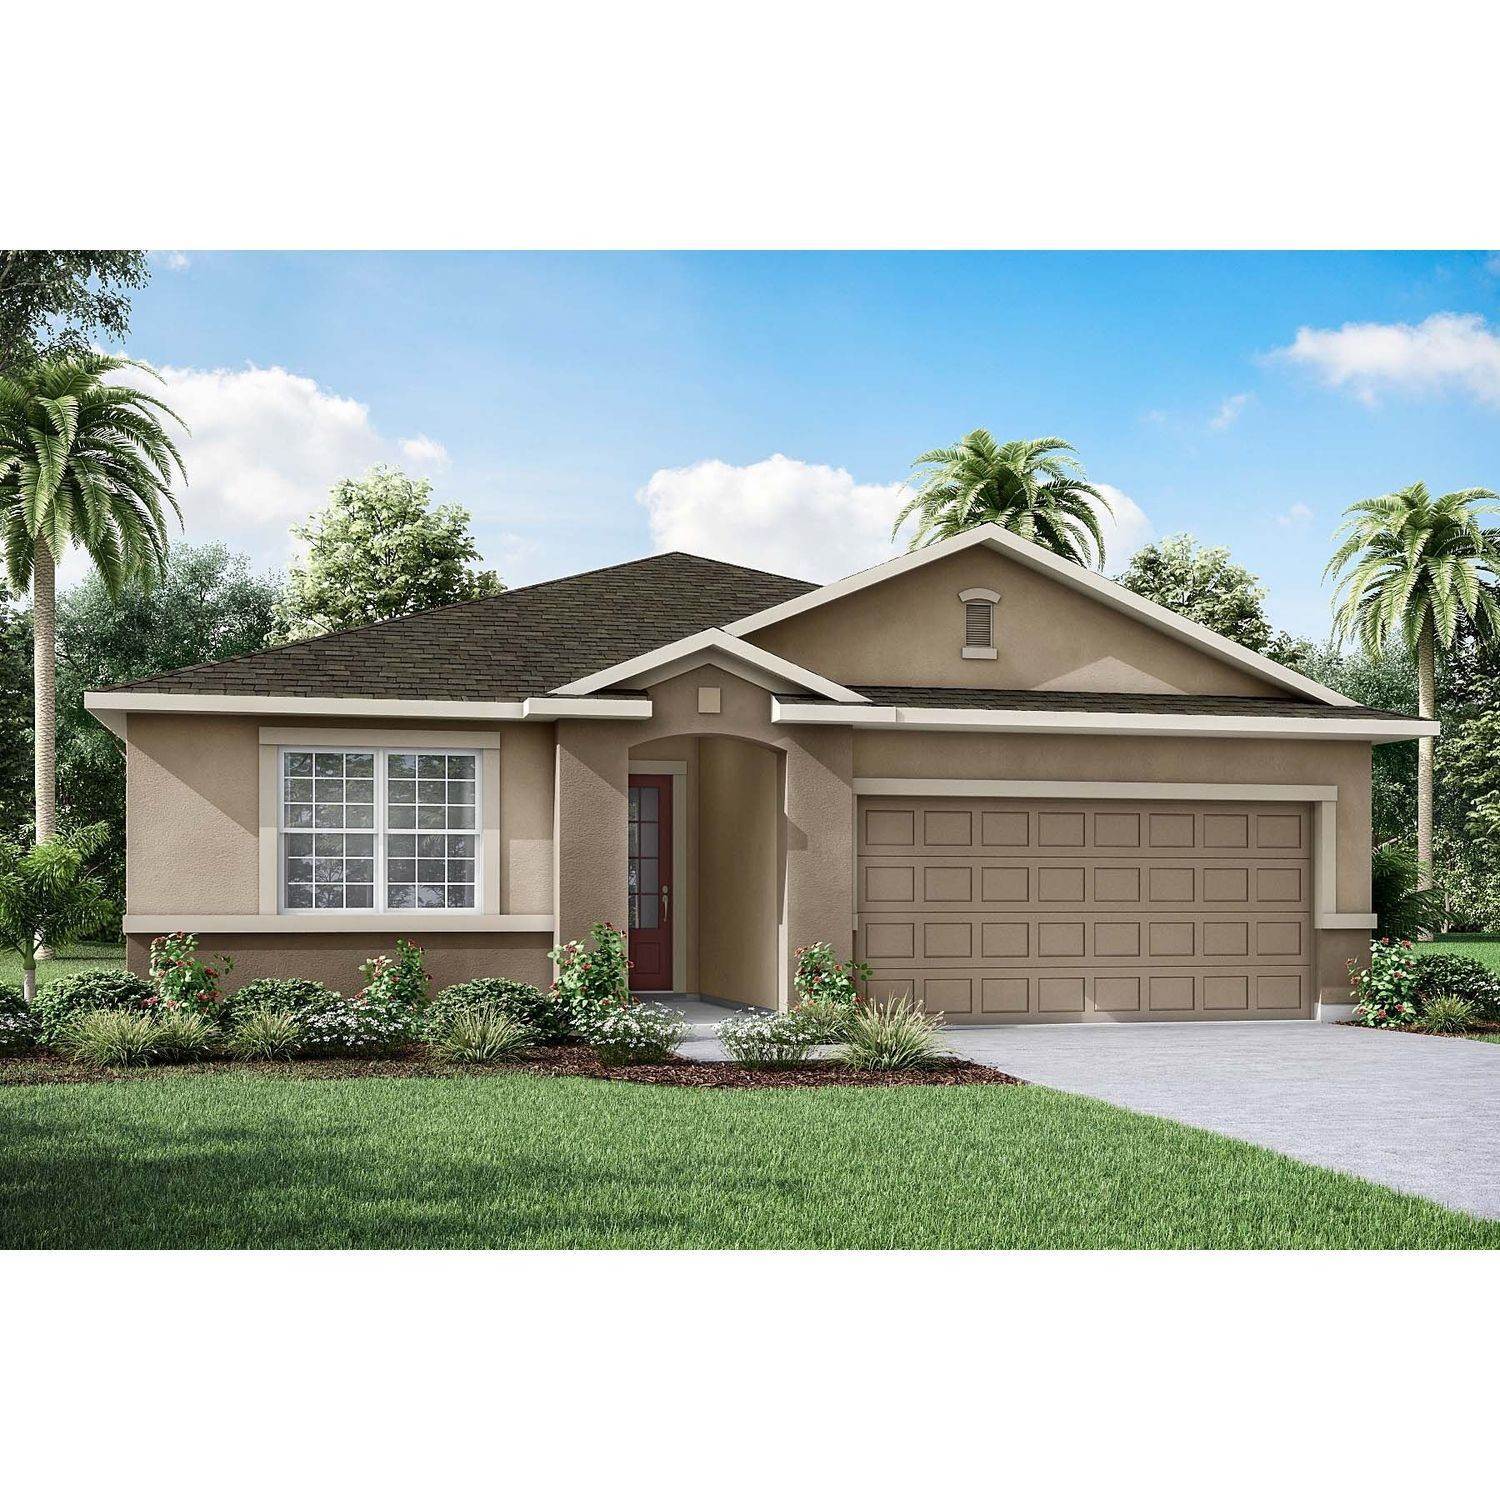 Single Family for Sale at Meridian Parks 12471 Shipwatch Street, Orlando, FL 32832